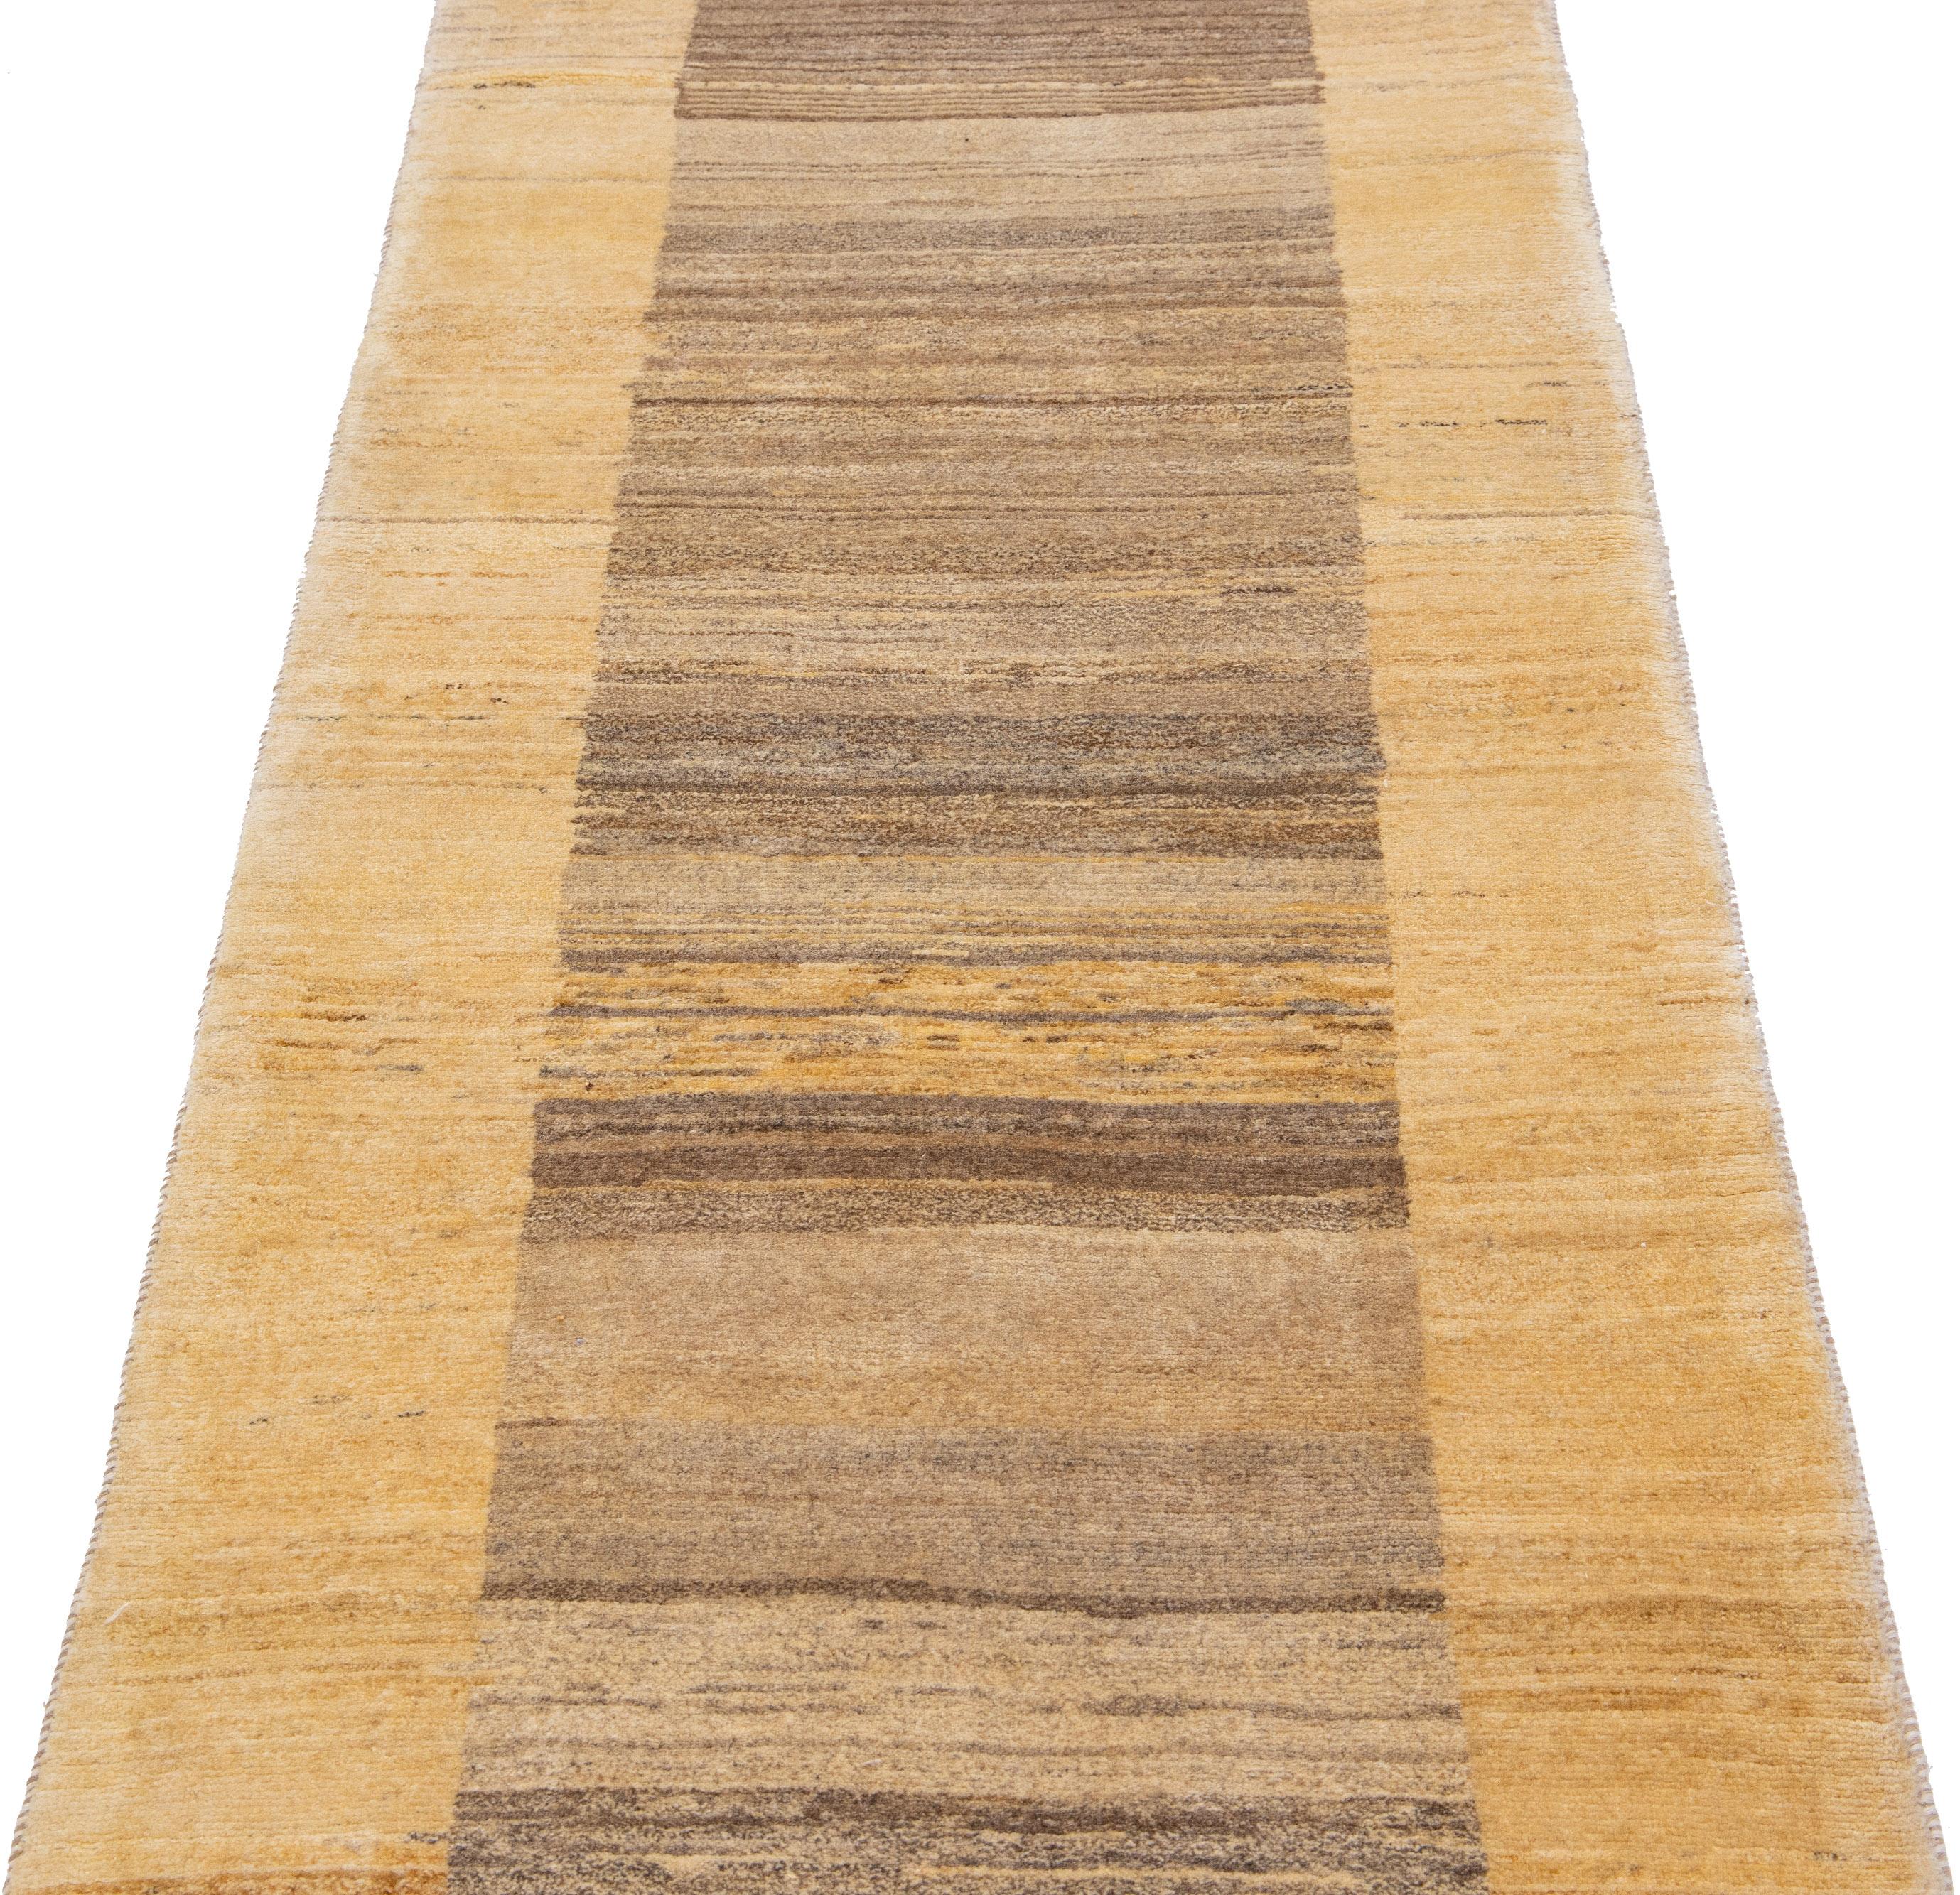 Beautiful modern Gabbeh-style hand-woven wool runner with a brown color field. This piece has beige accents in a gorgeous geometric design.

This rug measures: 2'7